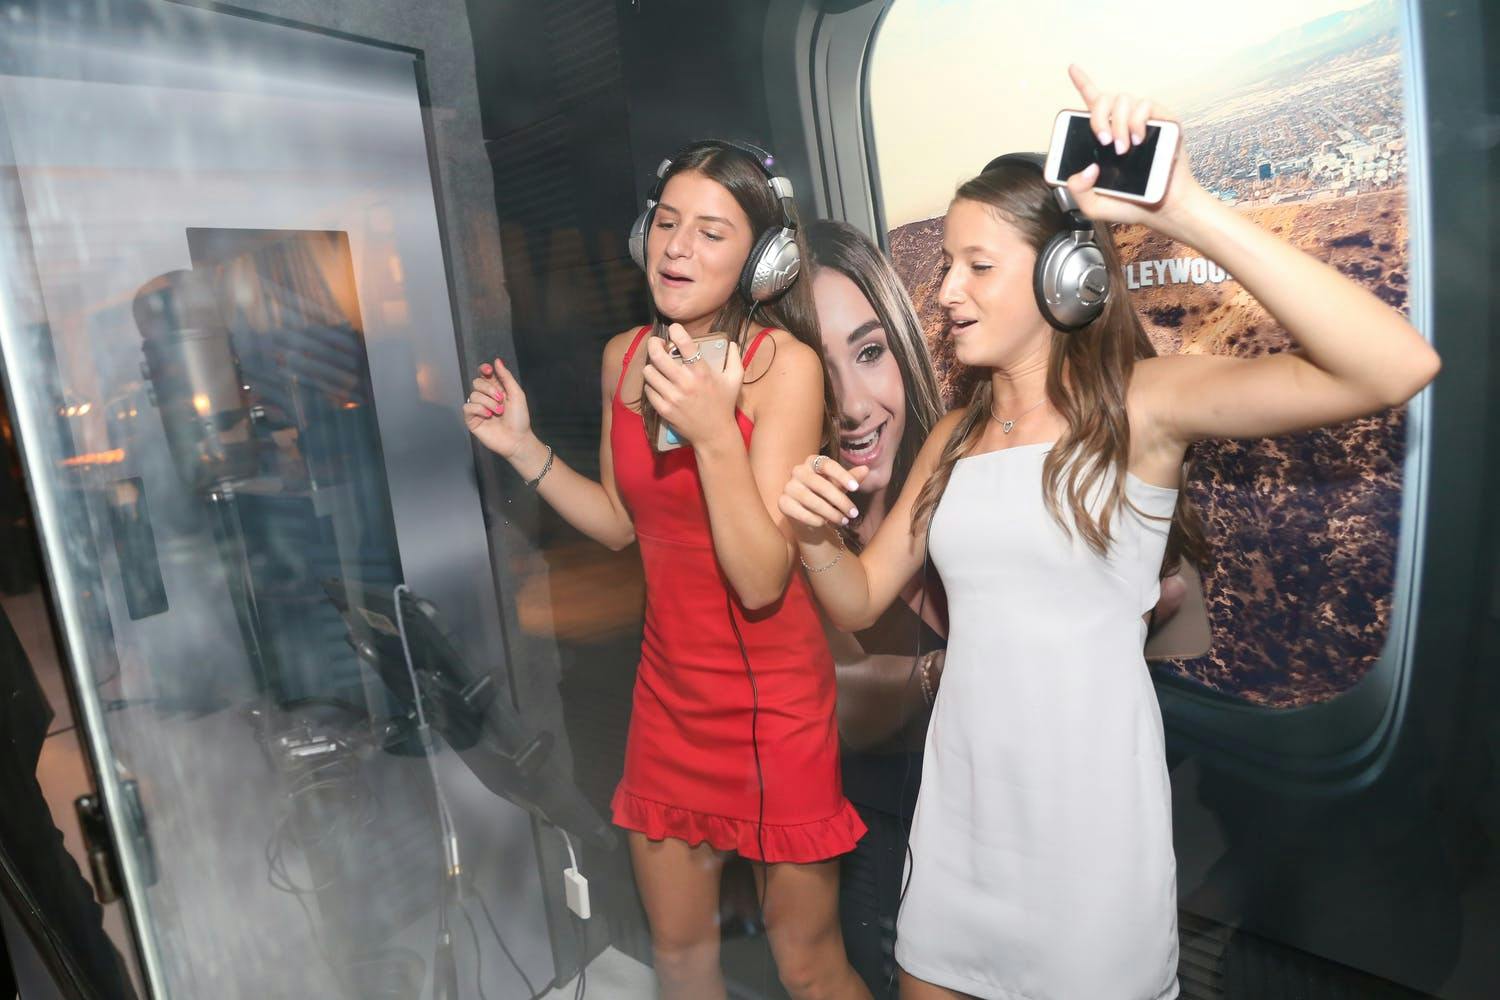 Two girls sing in recording studio booth for a corporate event activity | PartySlate